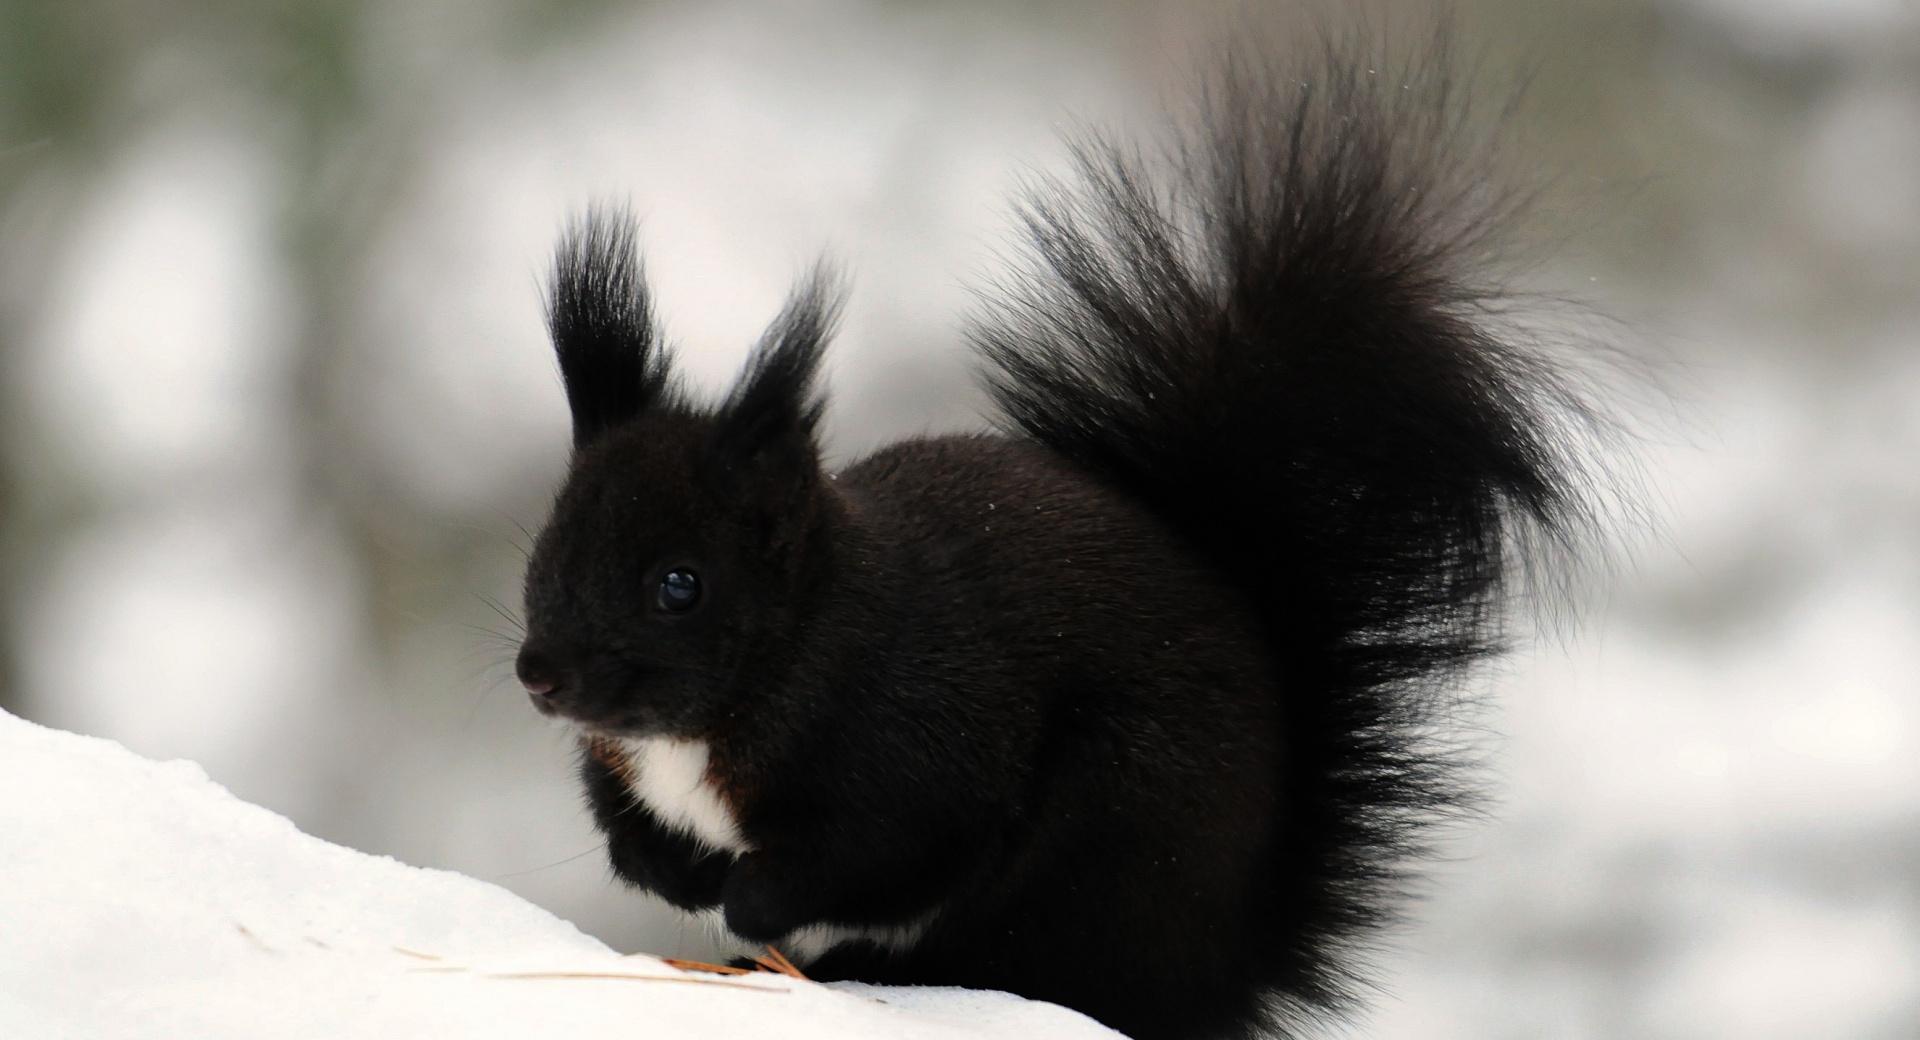 Dark Squirrel wallpapers HD quality